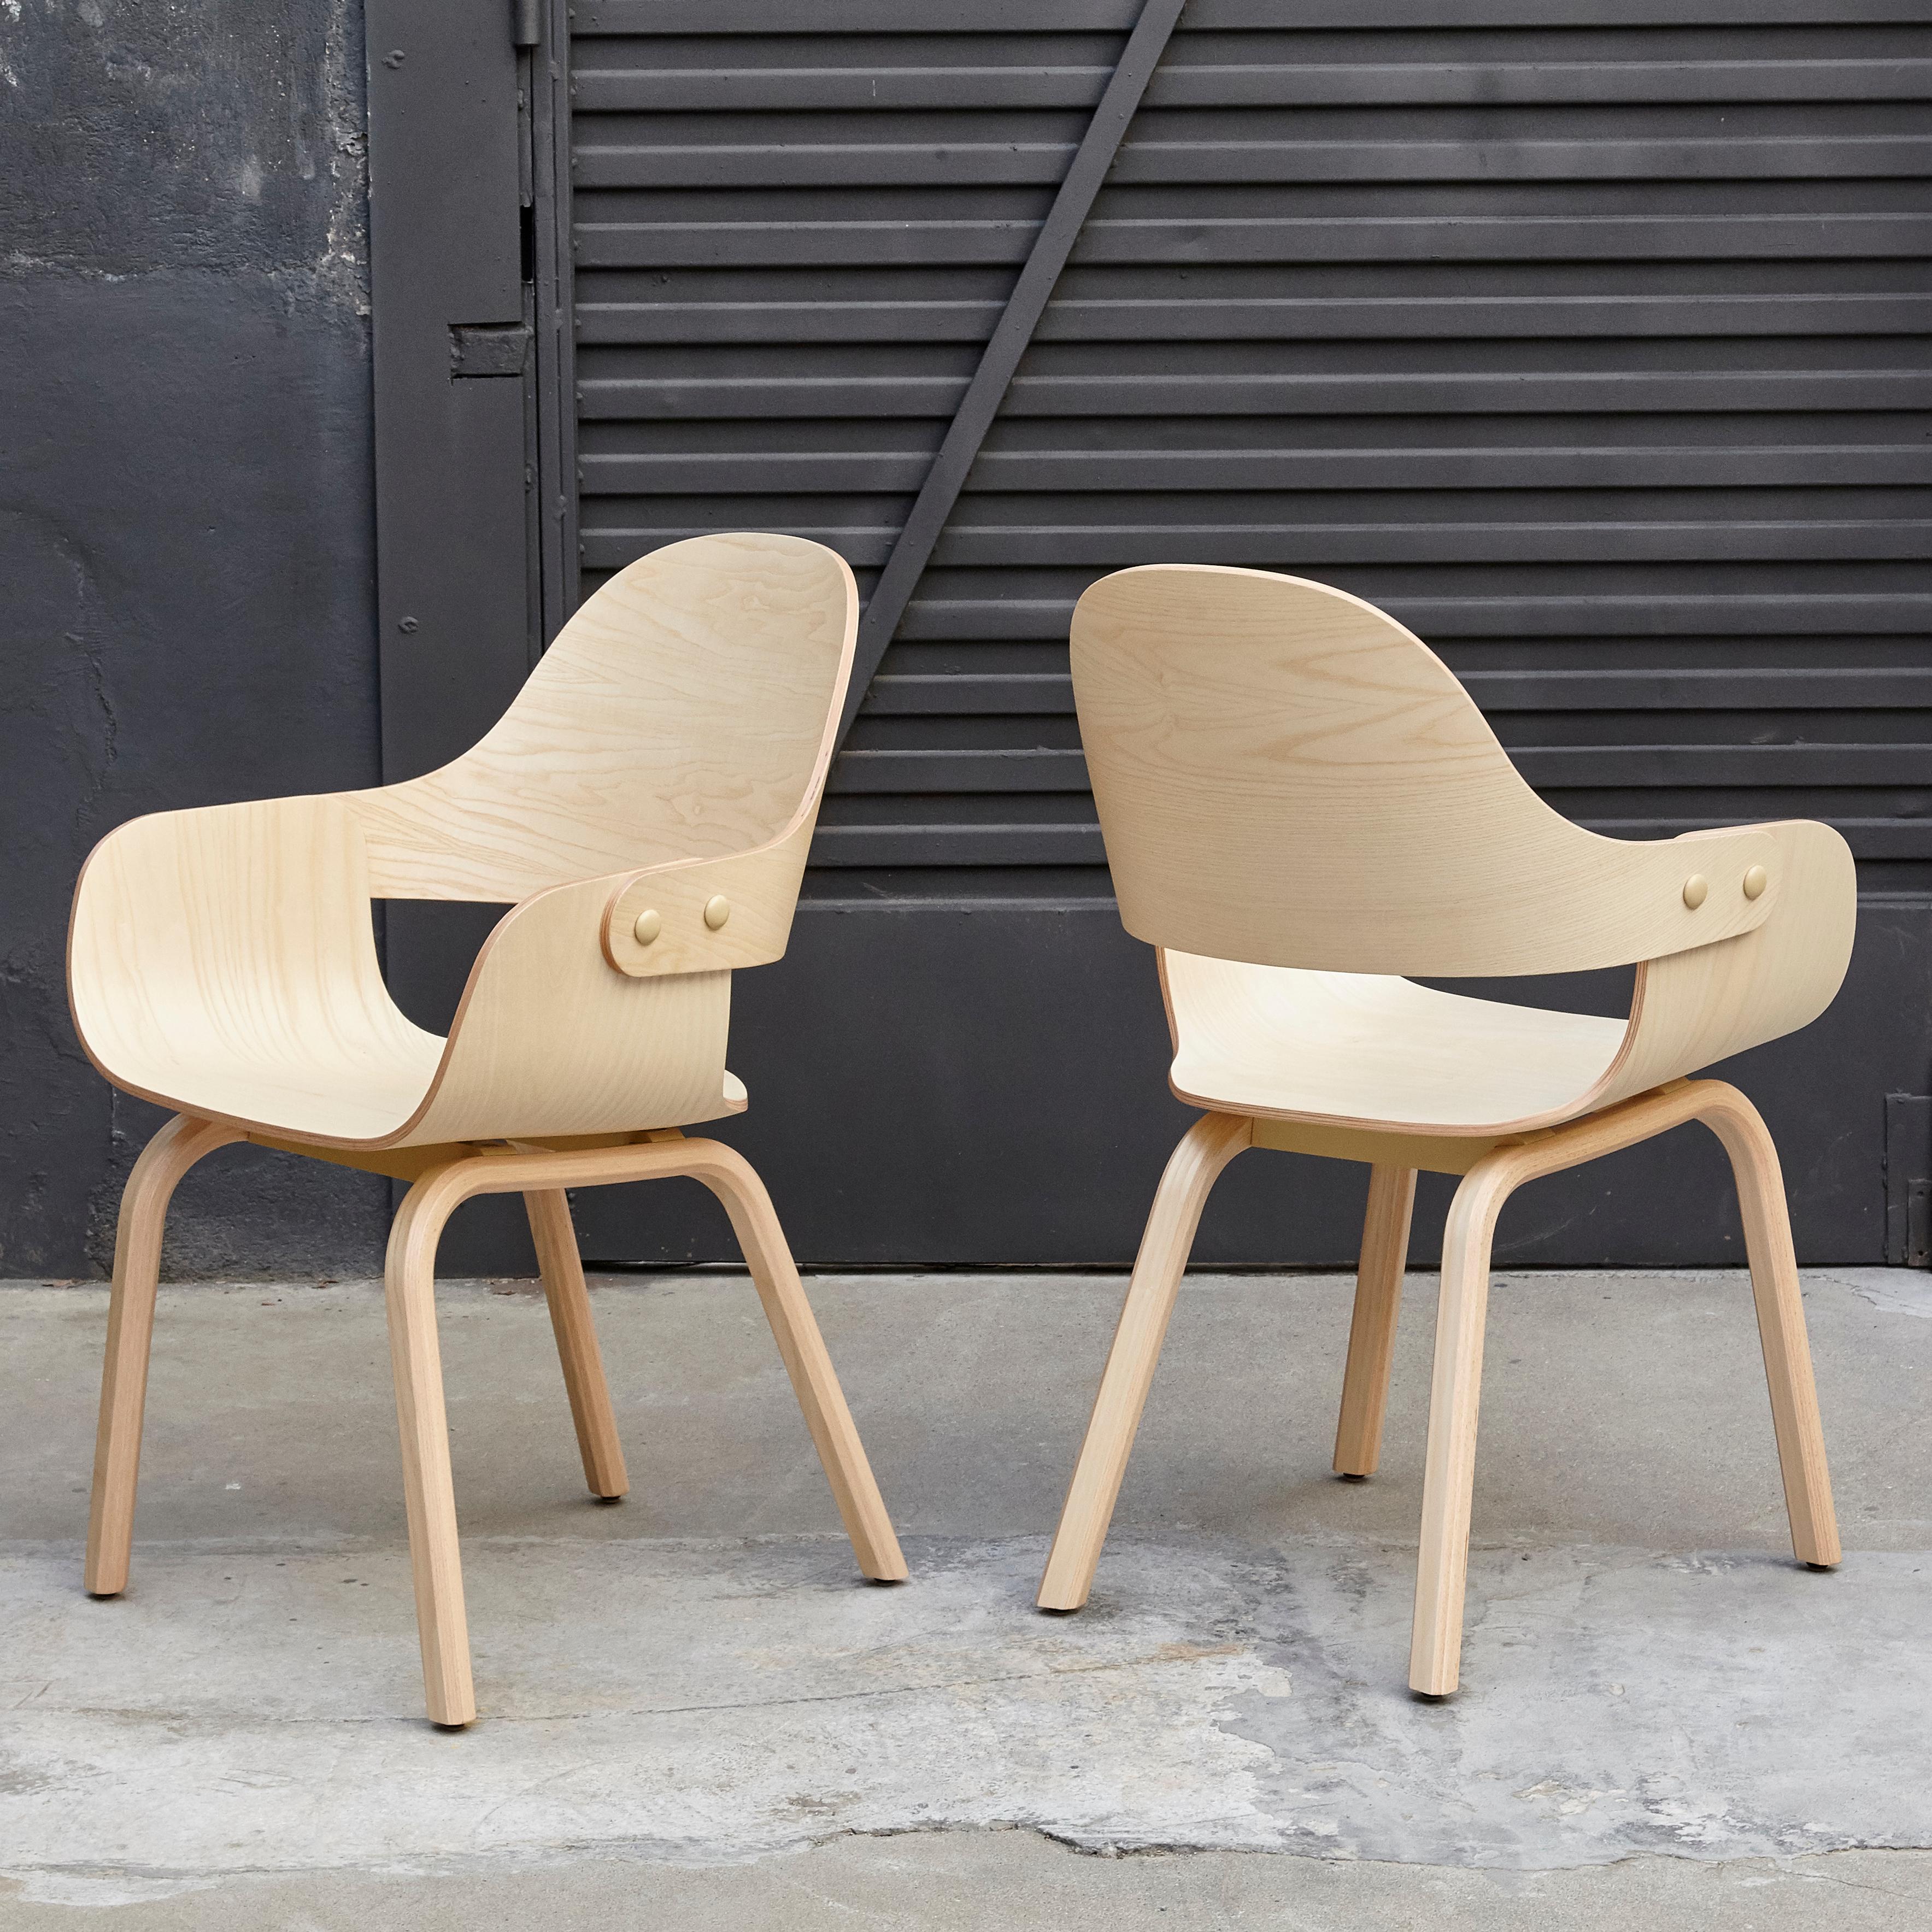 Modern Pair of Jaime Hayon, Contemporary, Wood Chair Showtime Nude by BD Barcelona ENVIO